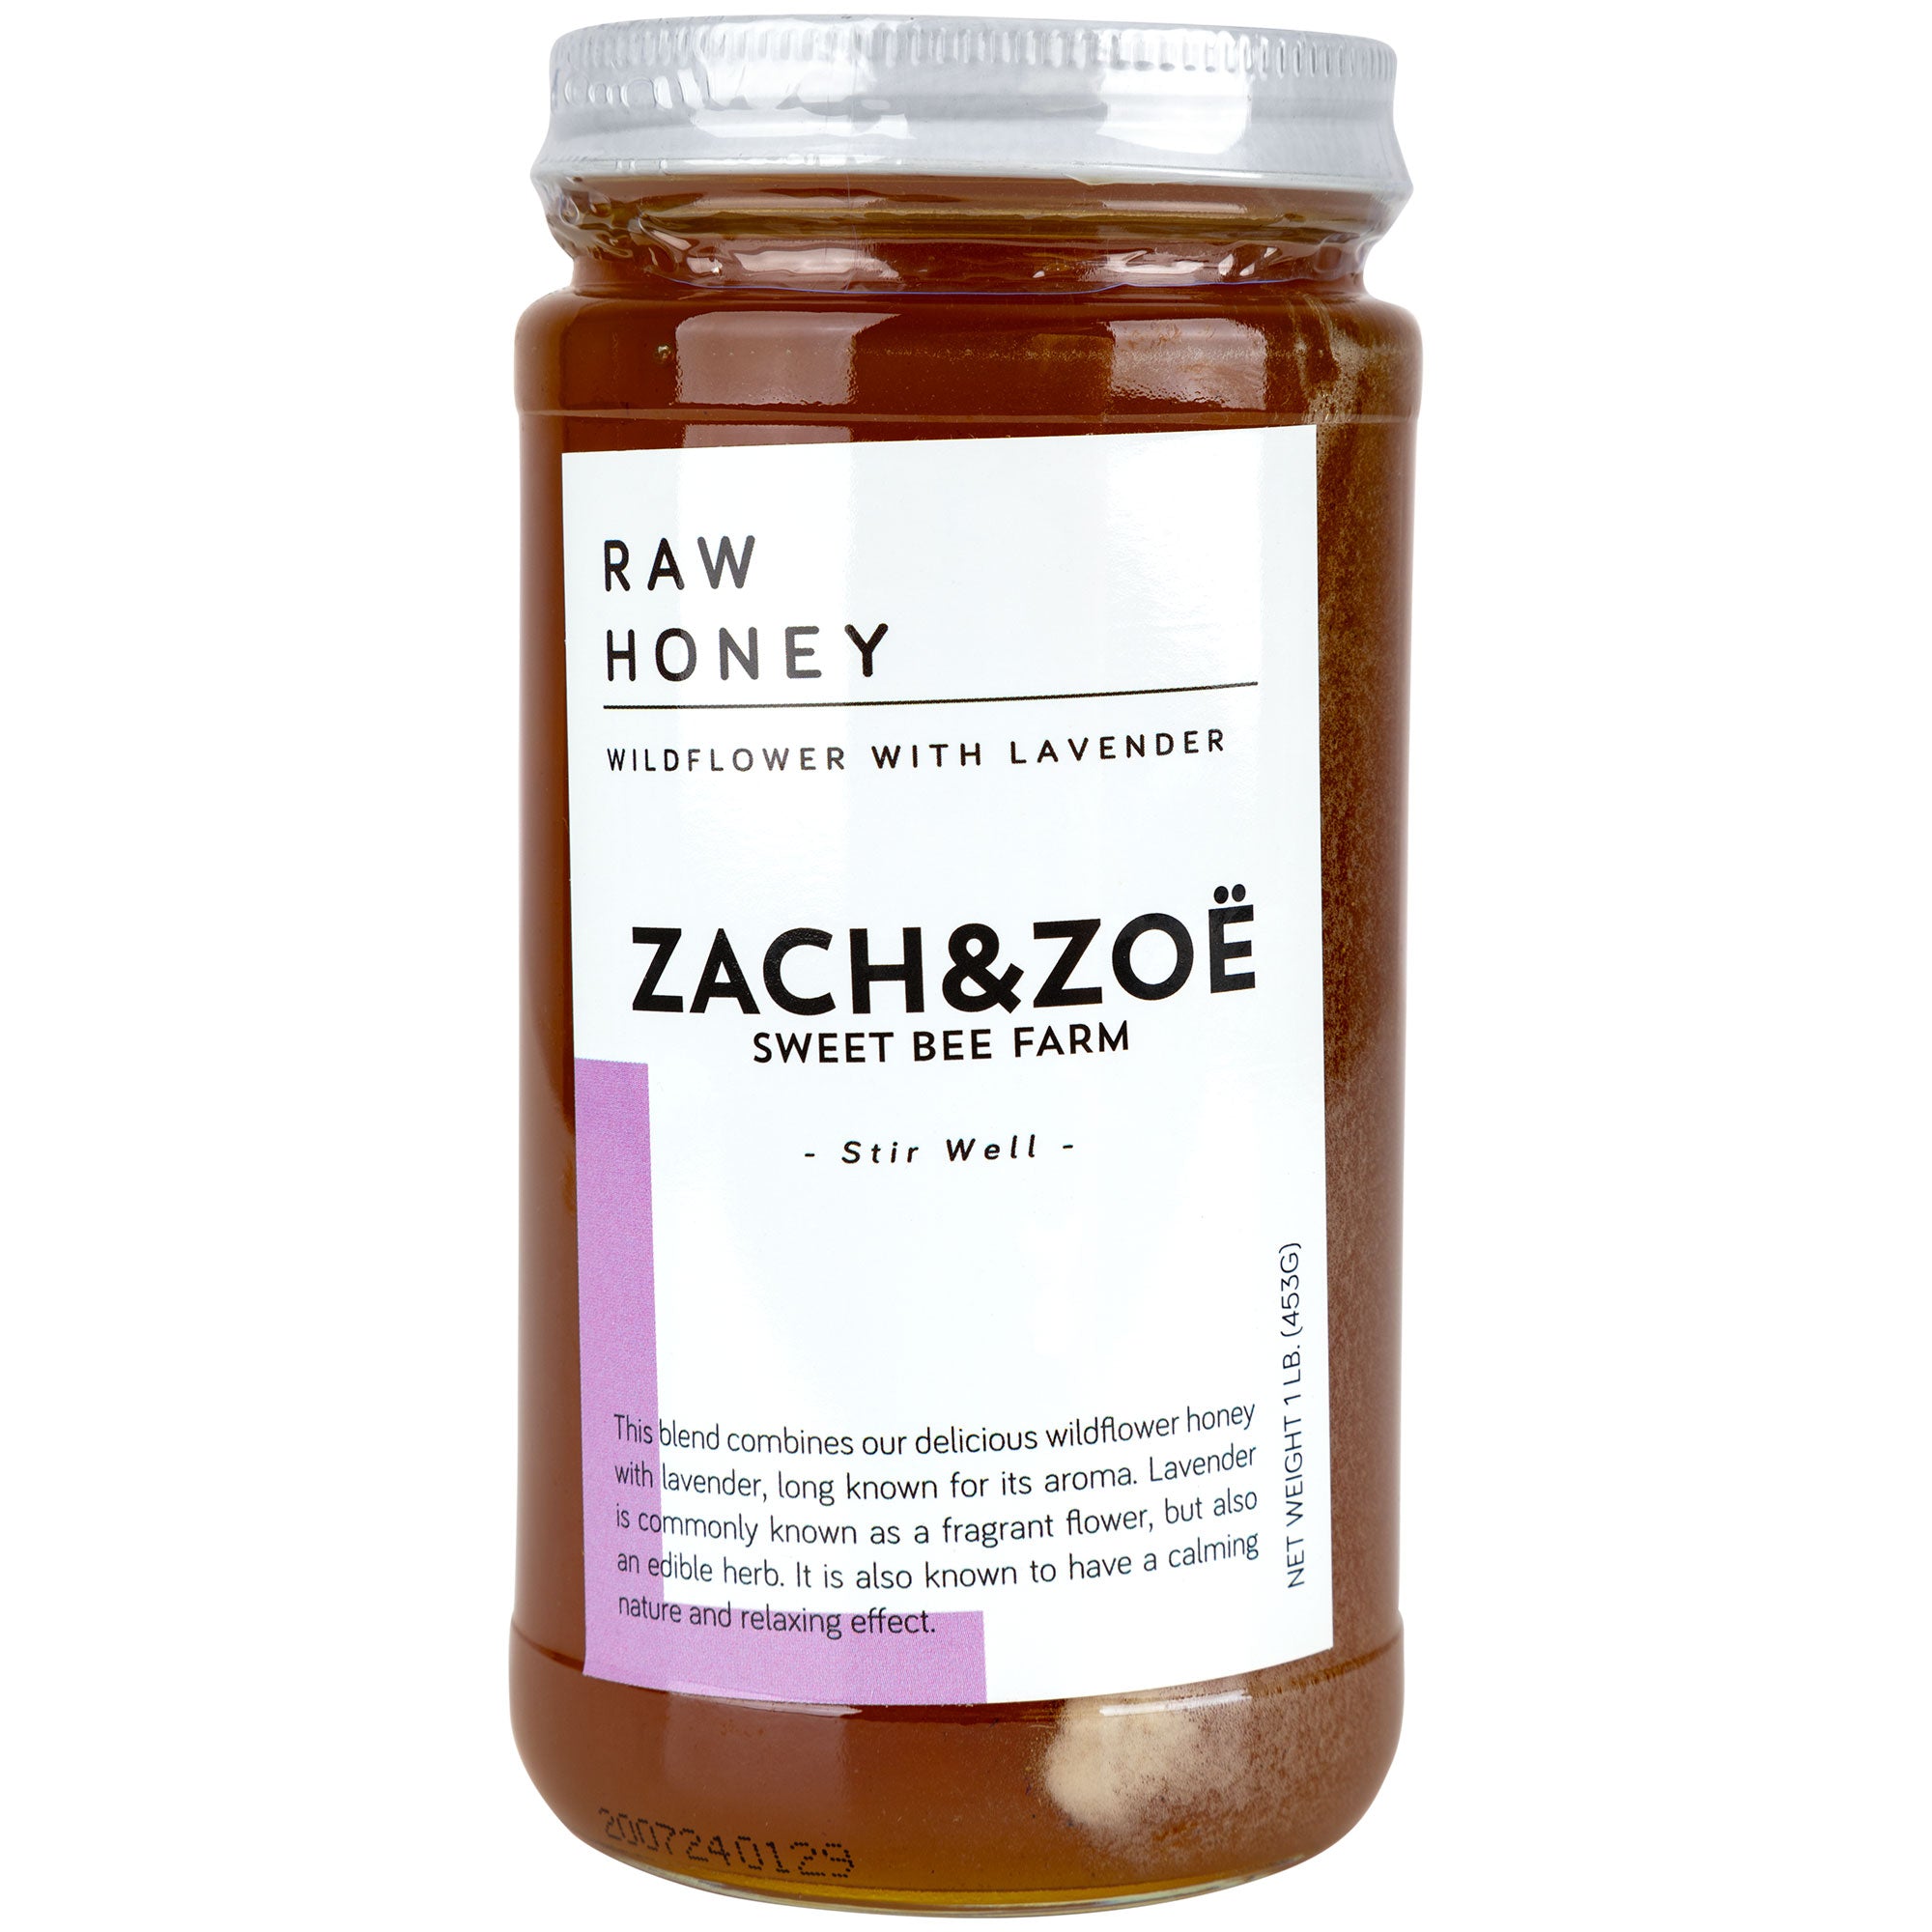 Zach And Zoe Sweet Bee Farm Raw Unfiltered Honey - 16 Oz. - Lavender